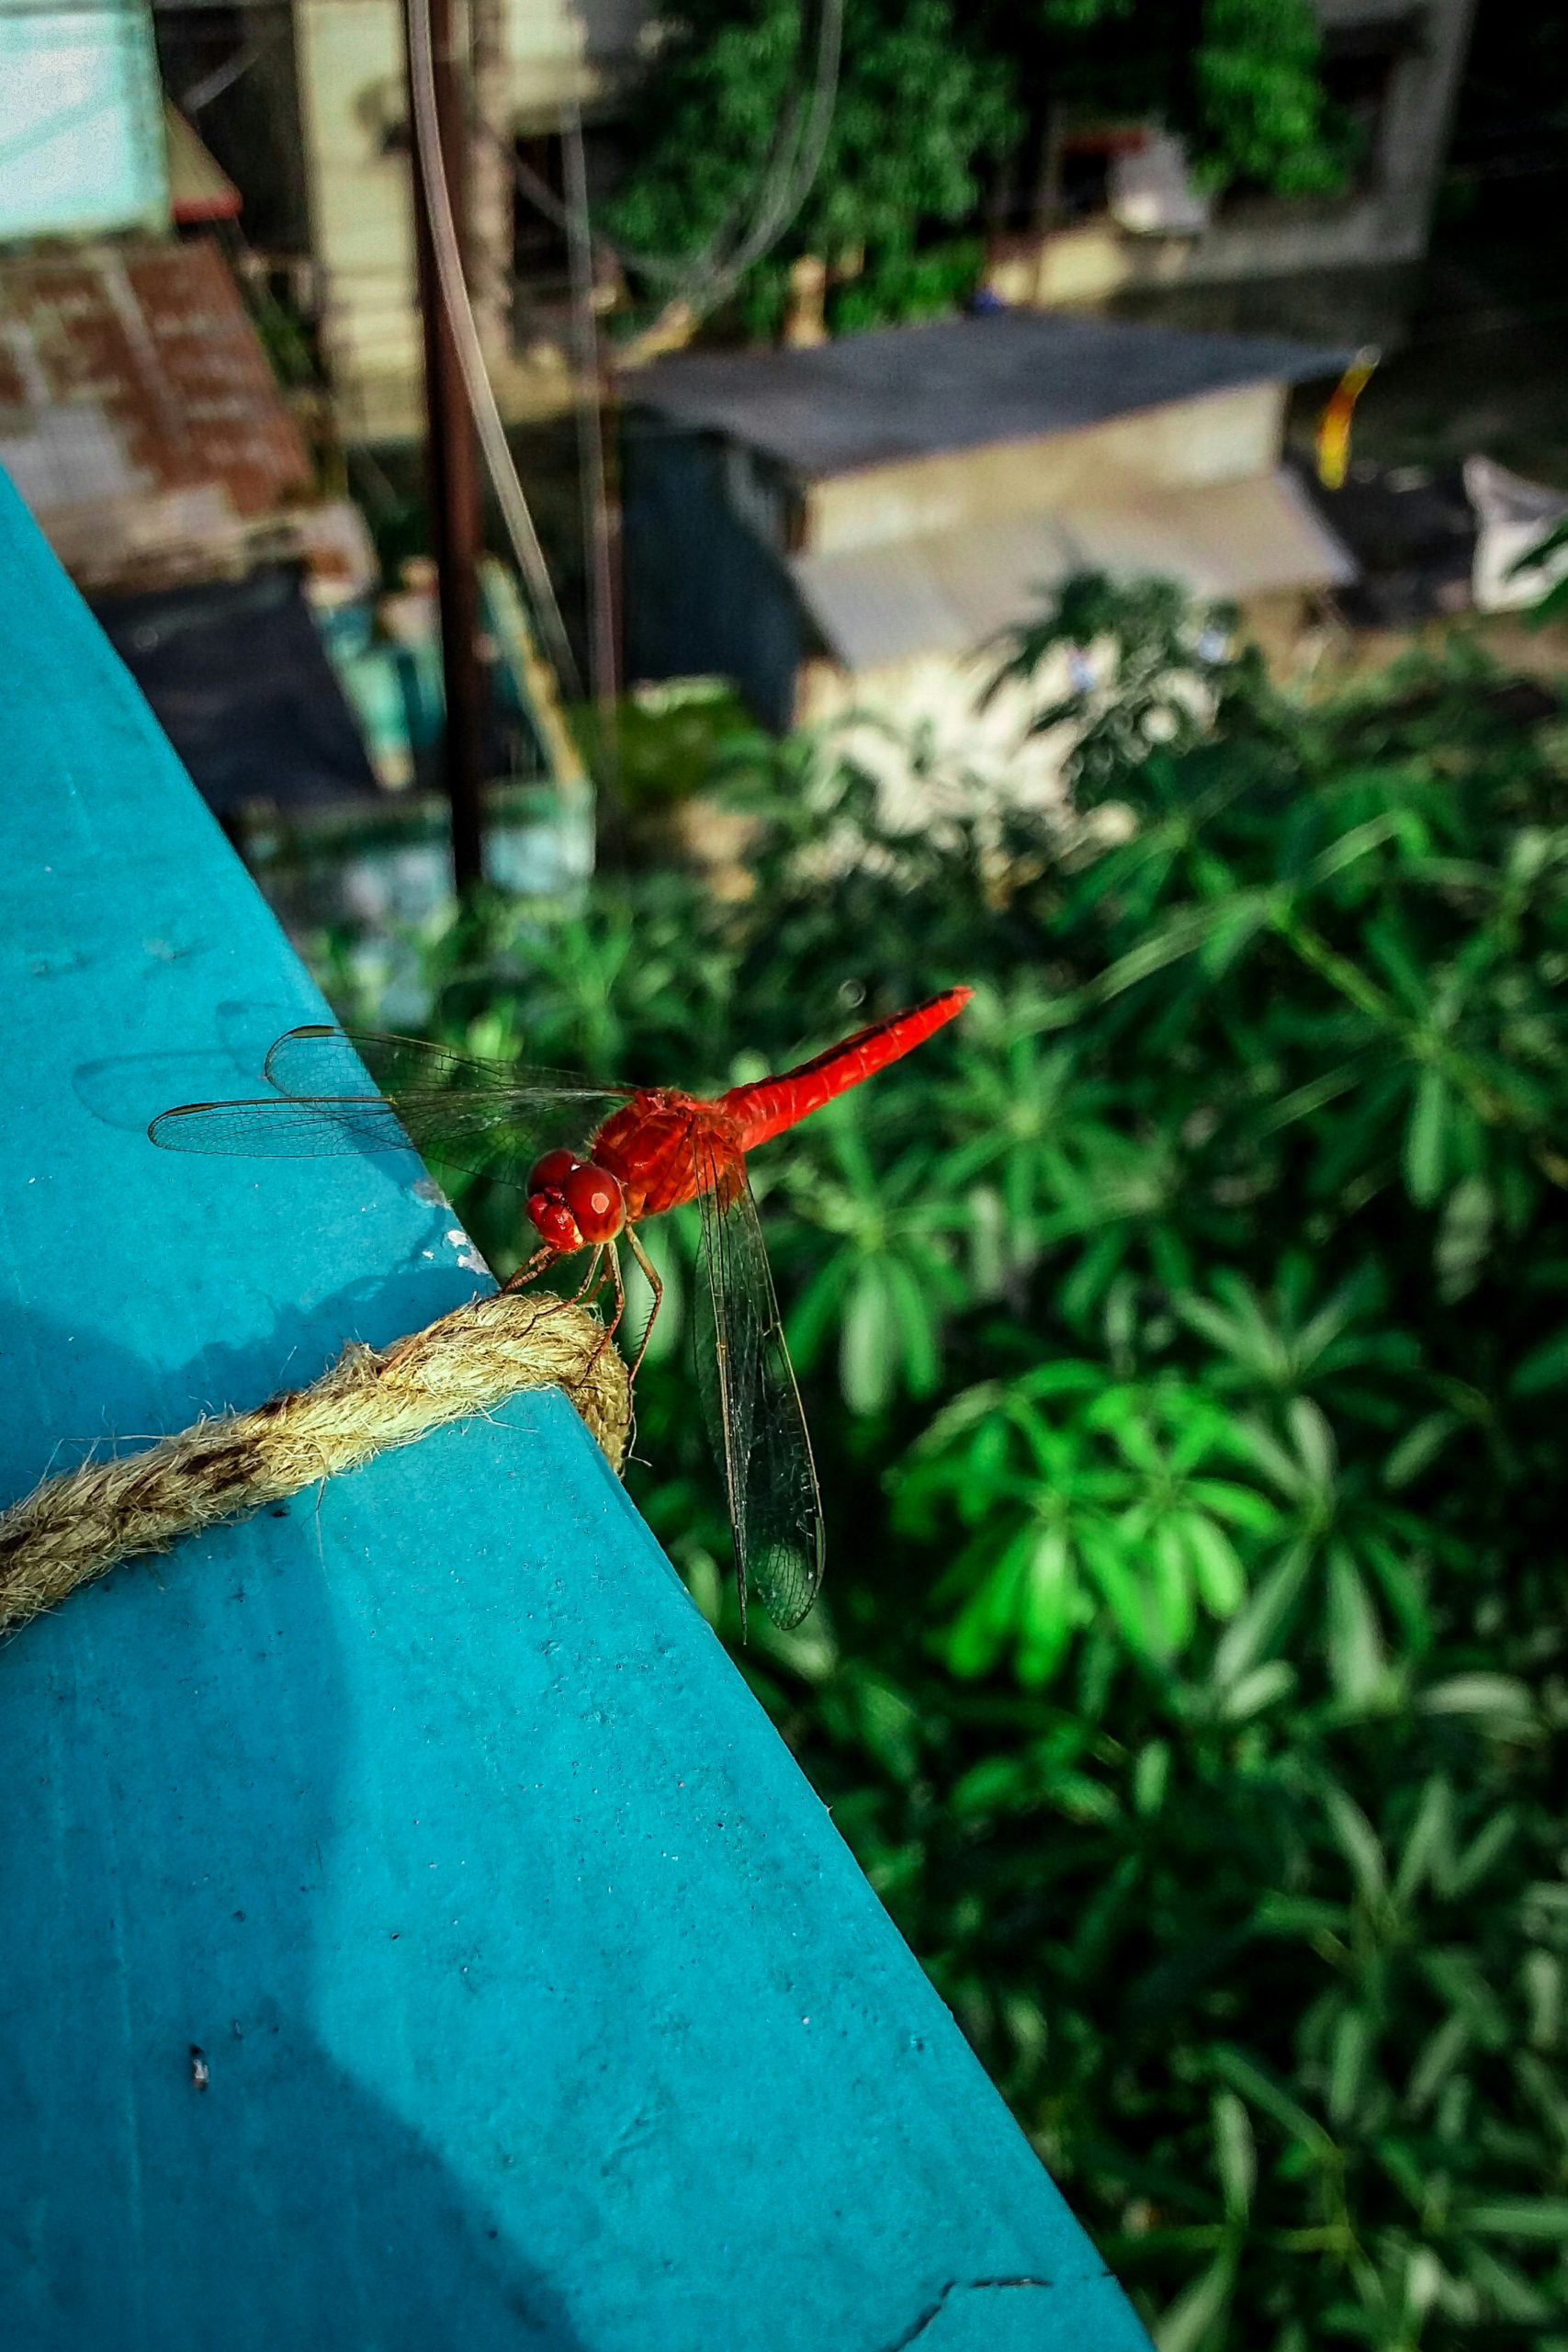 Red cricket